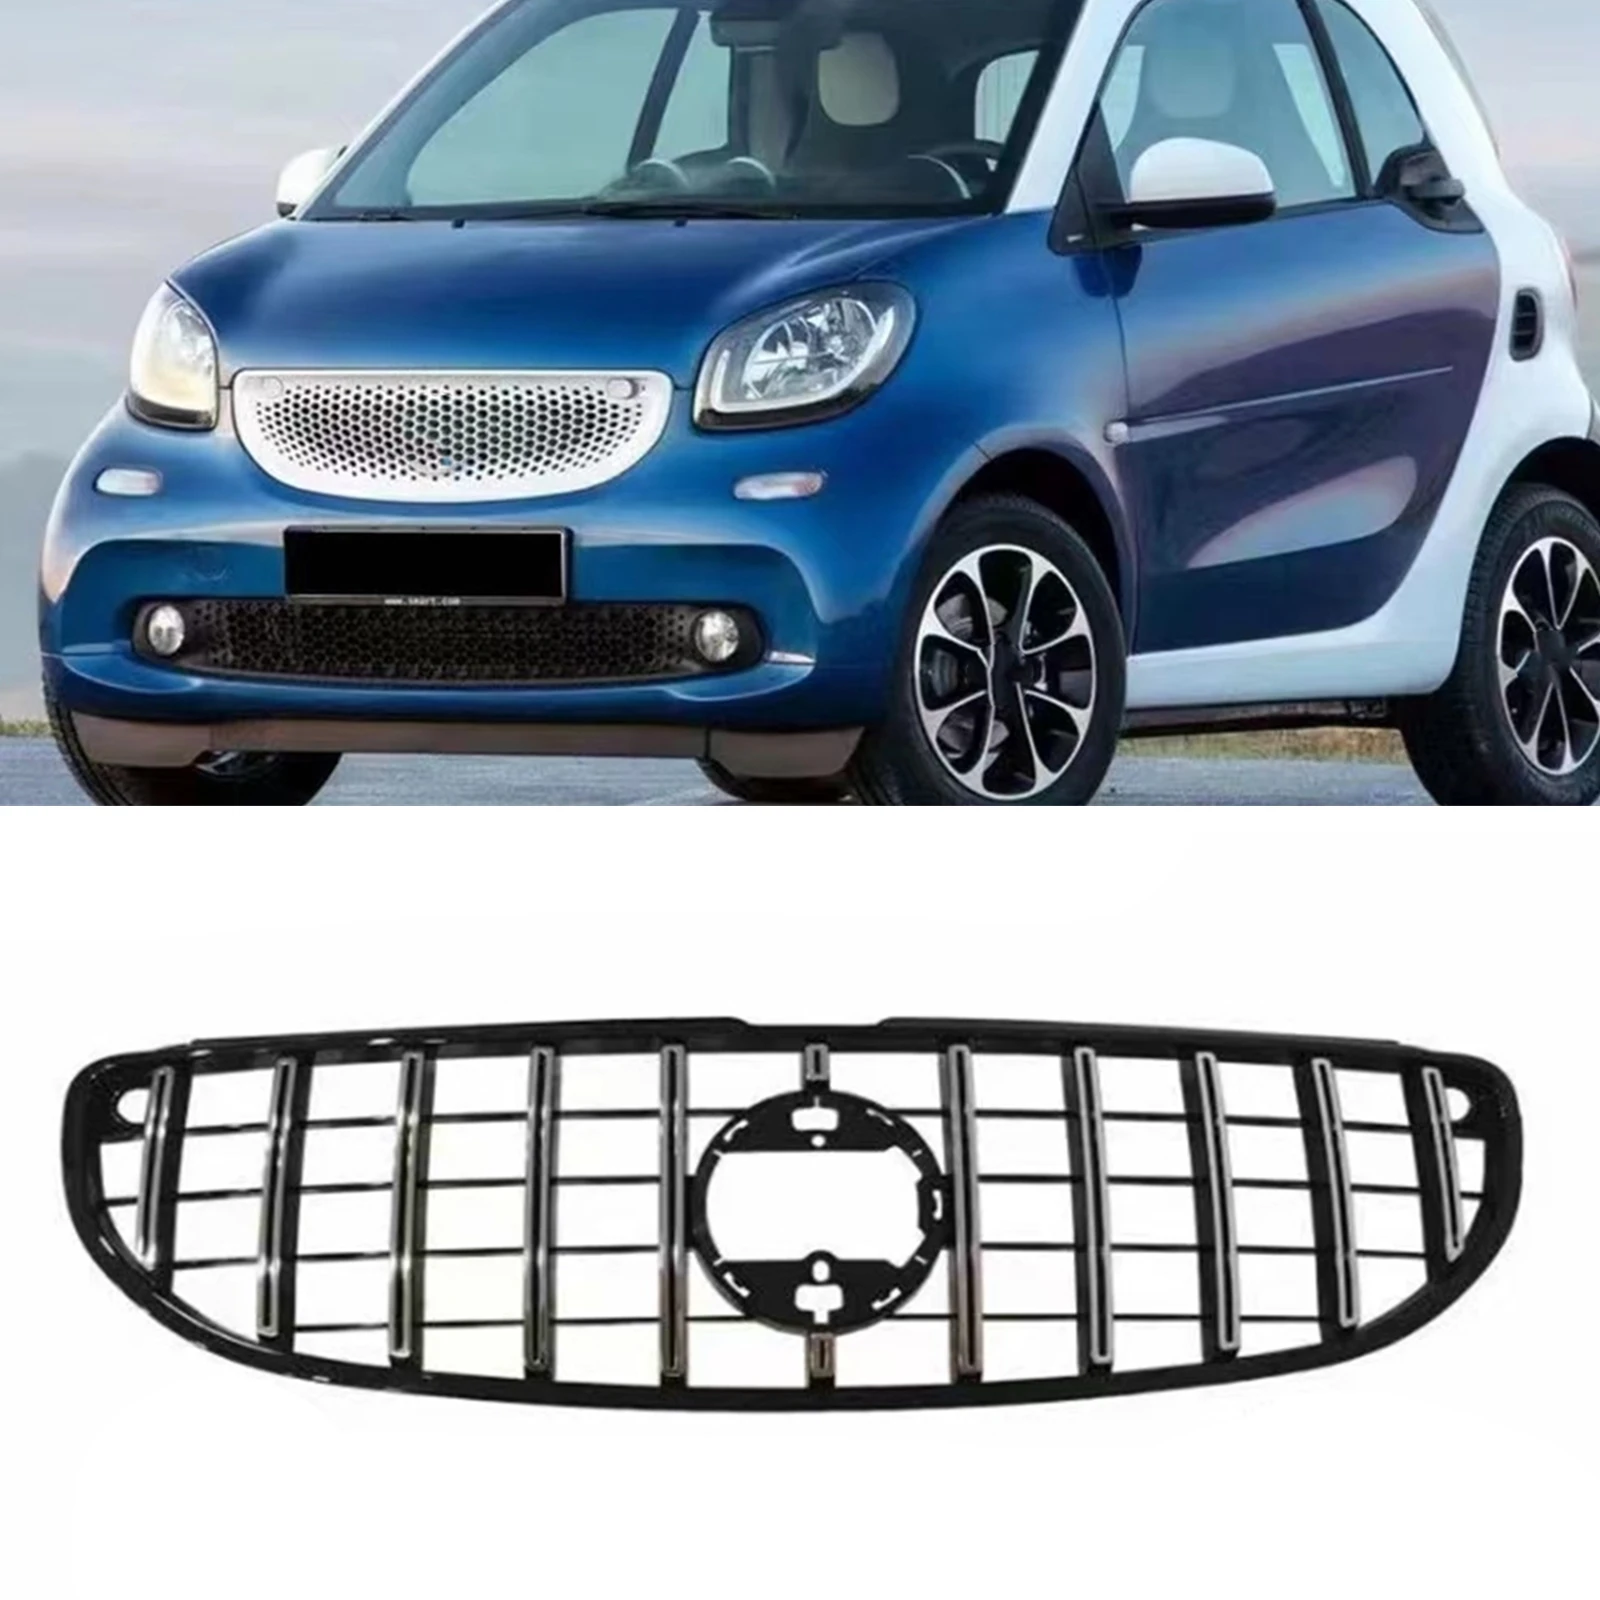 

Car Front Kidney Racing Grill Mesh Upper Replacement Bumper Hood Grille For Mercedes Benz Fortwo W453 2 Door 2015-2019